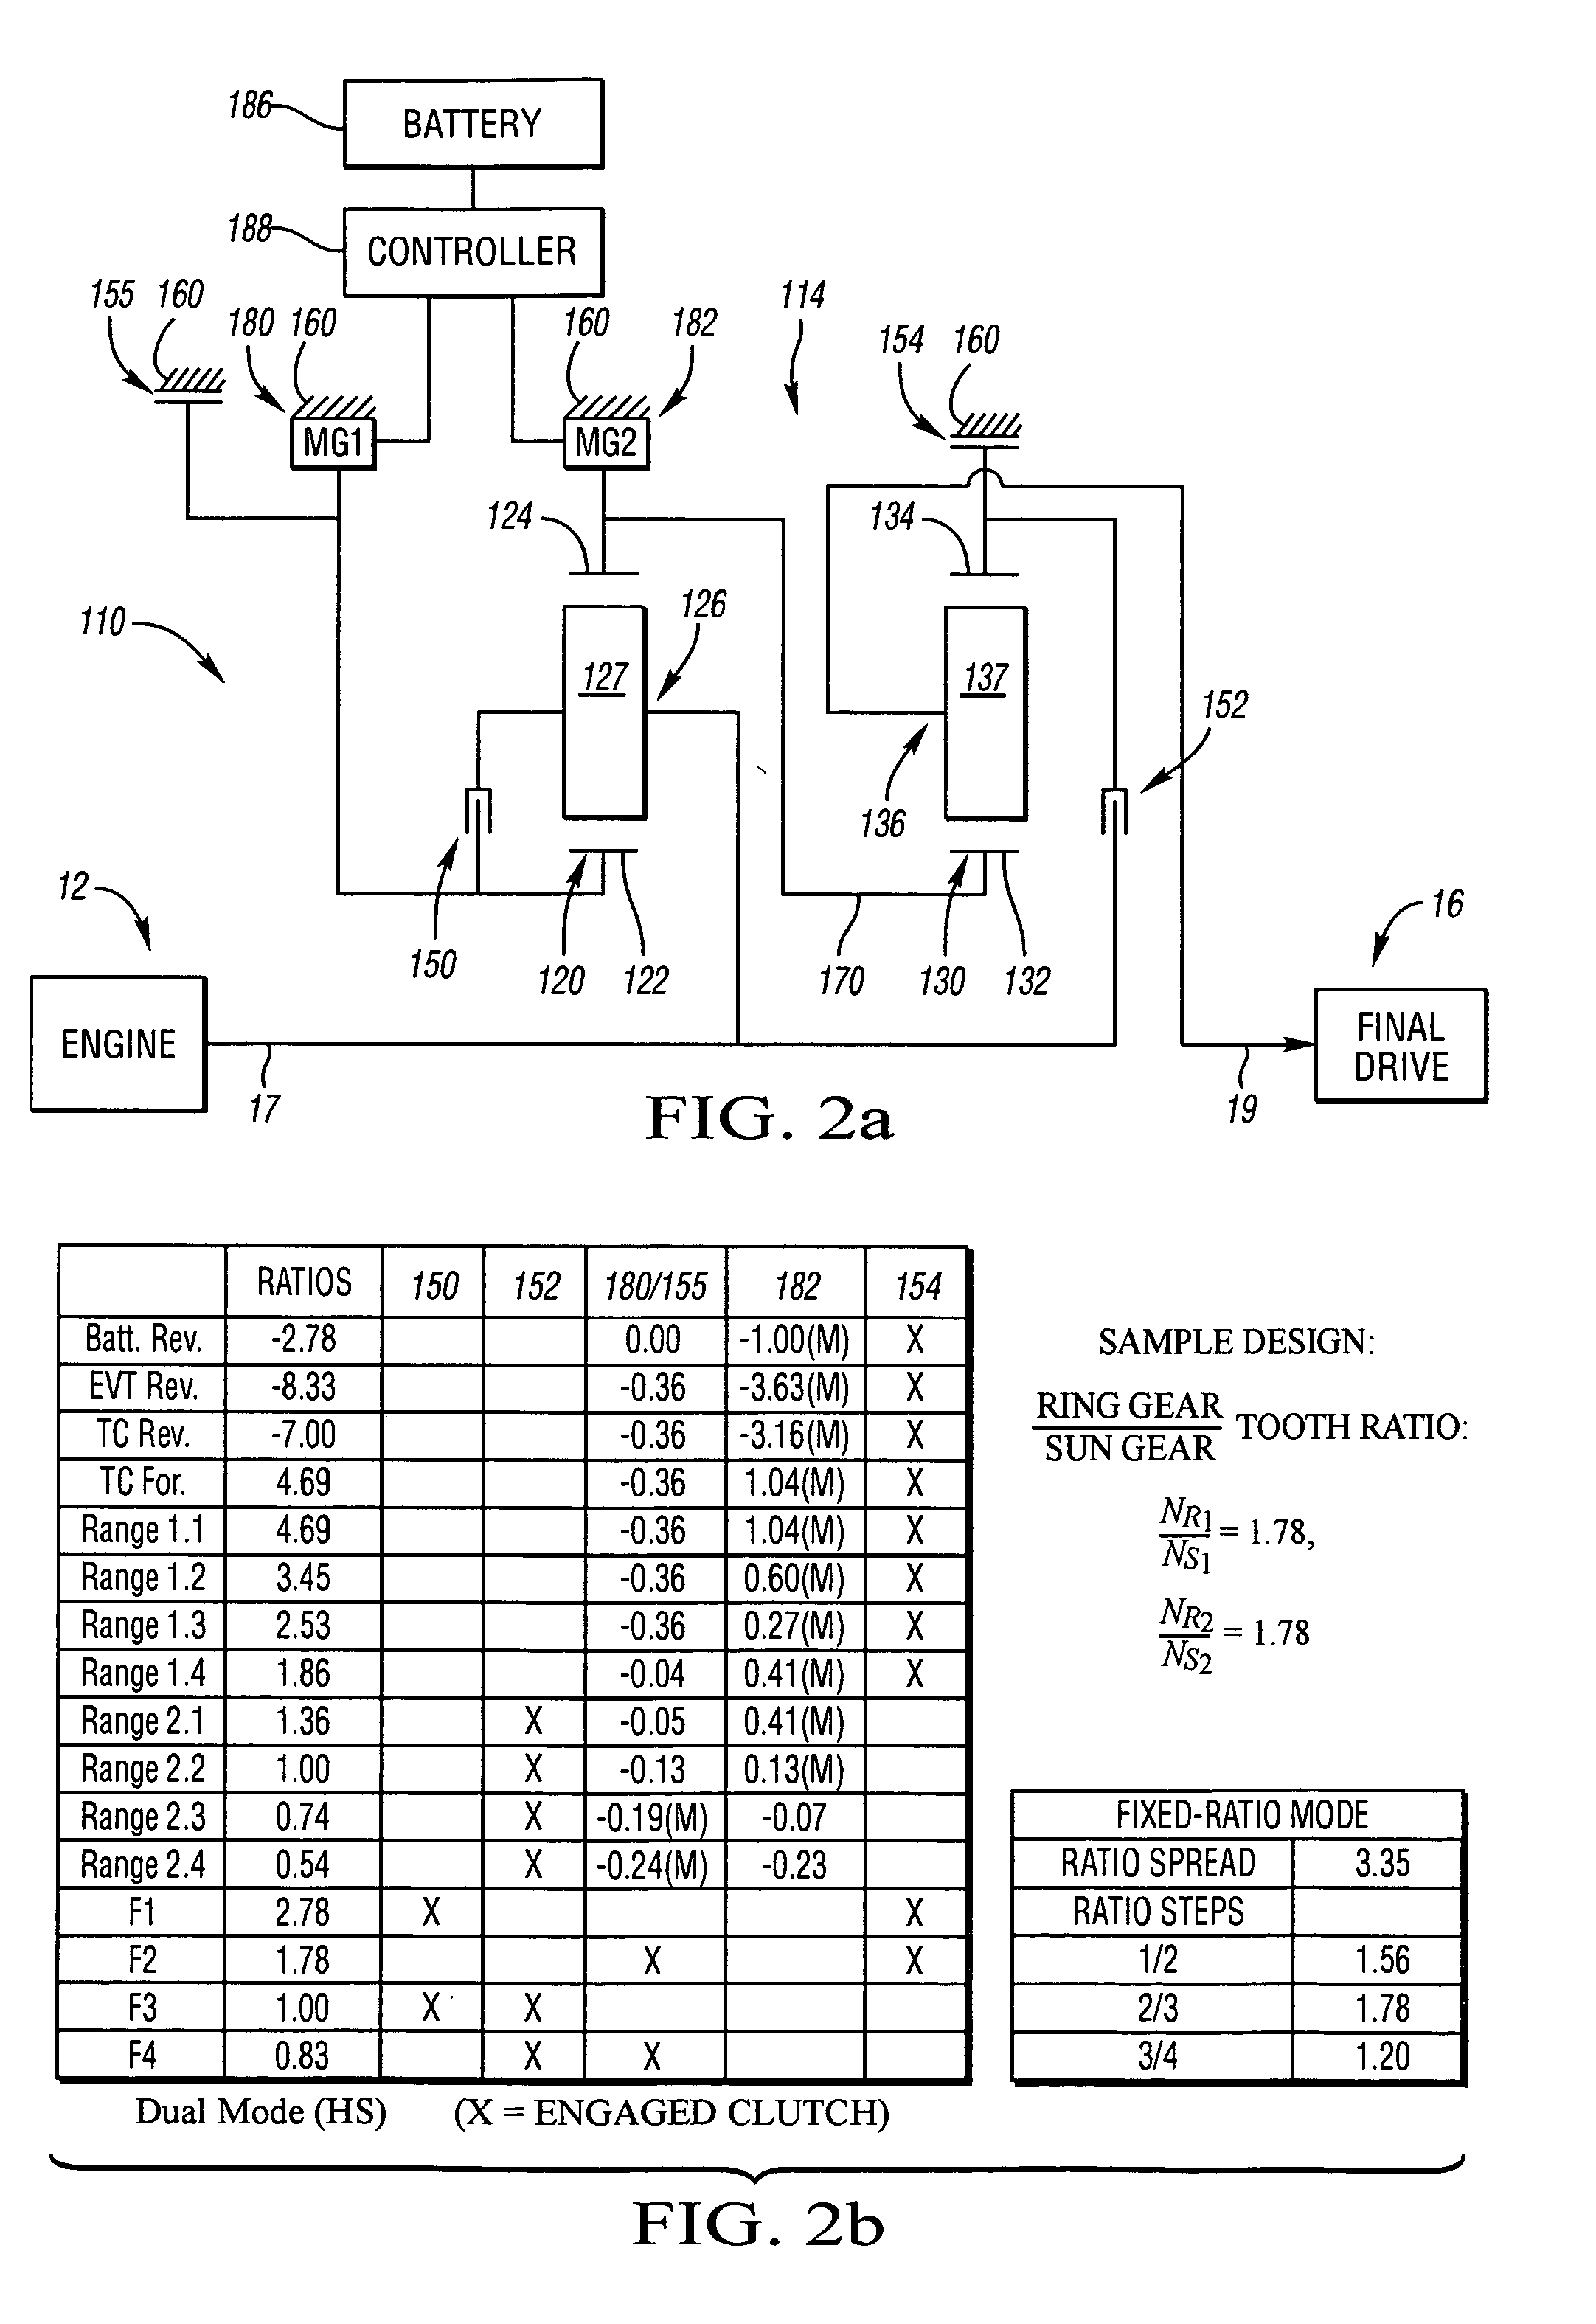 Electrically variable transmission having two planetary gear sets with one fixed interconnection